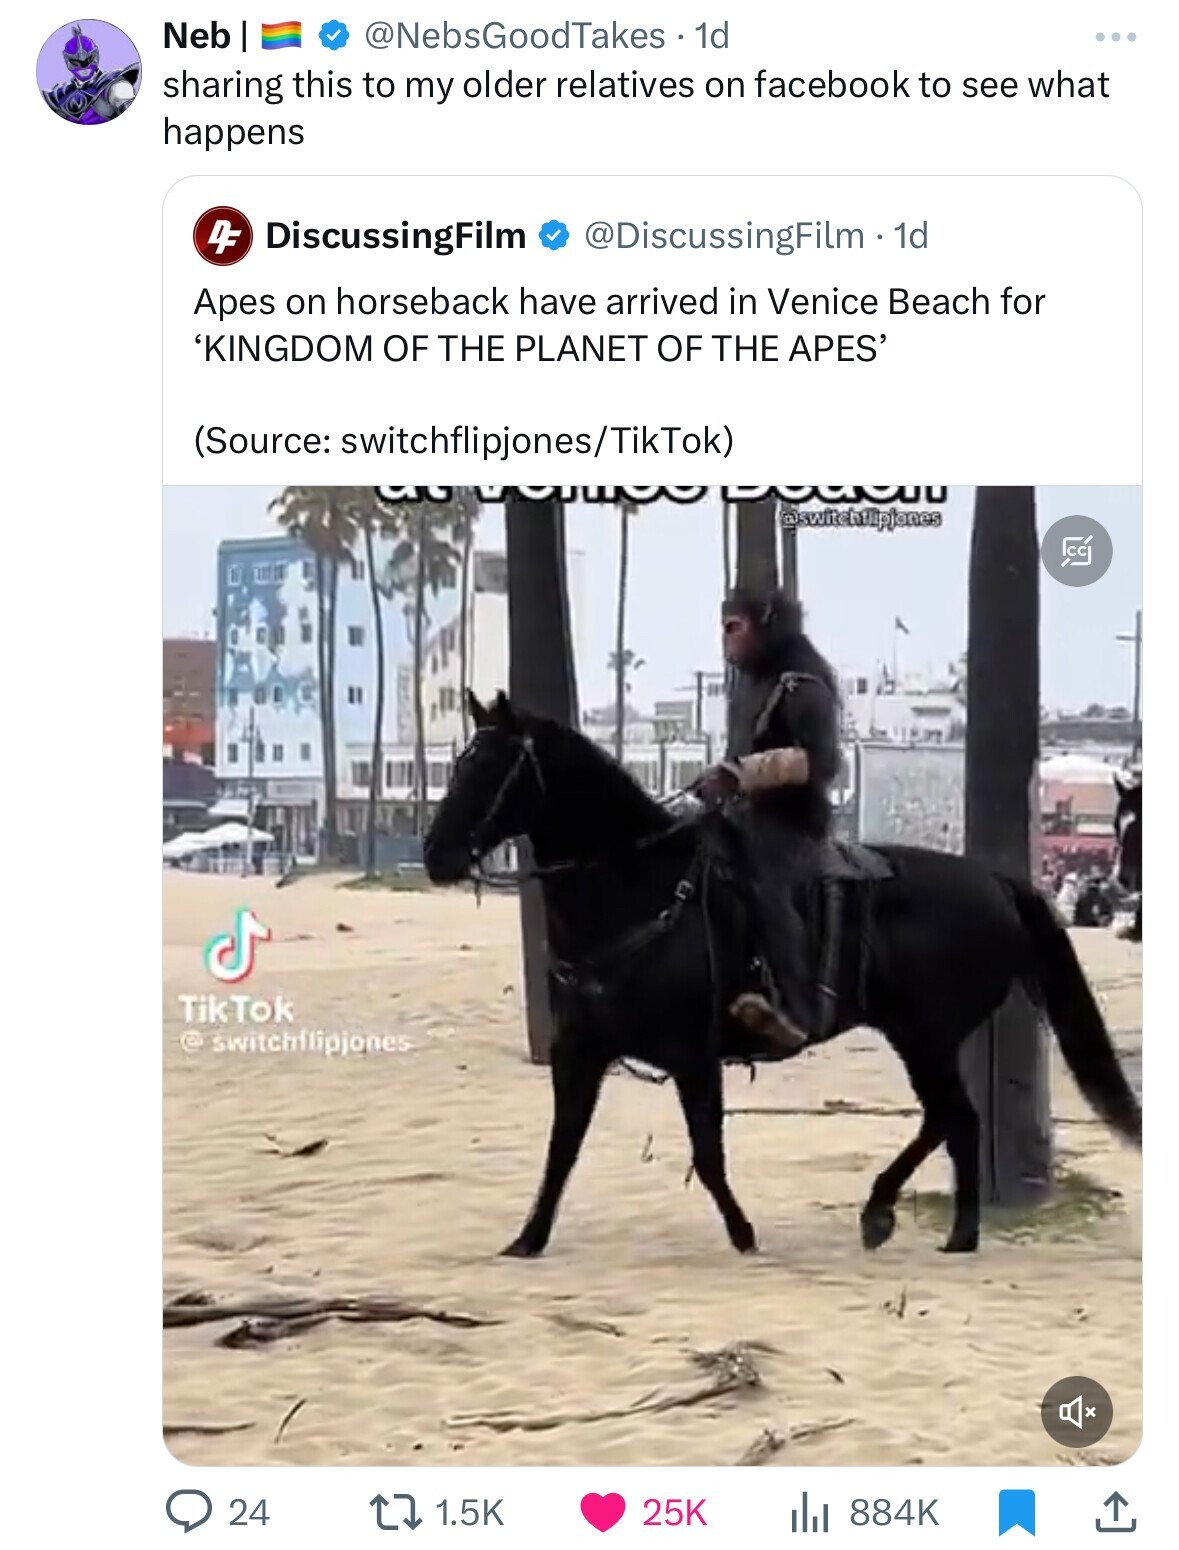 @NebsGoodTakes 1d Neb I sharing this to my older relatives on facebook to see what happens 4F DiscussingFilm @DiscussingFilm - dd Apes on horseback have arrived in Venice Beach for 'KINGDOM OF THE PLANET OF THE APES' (Source: switchflipjones/TikTok) MUU @switchilipiones CC TikTok @ switchilipiones 24 1.5K 25K 884K 